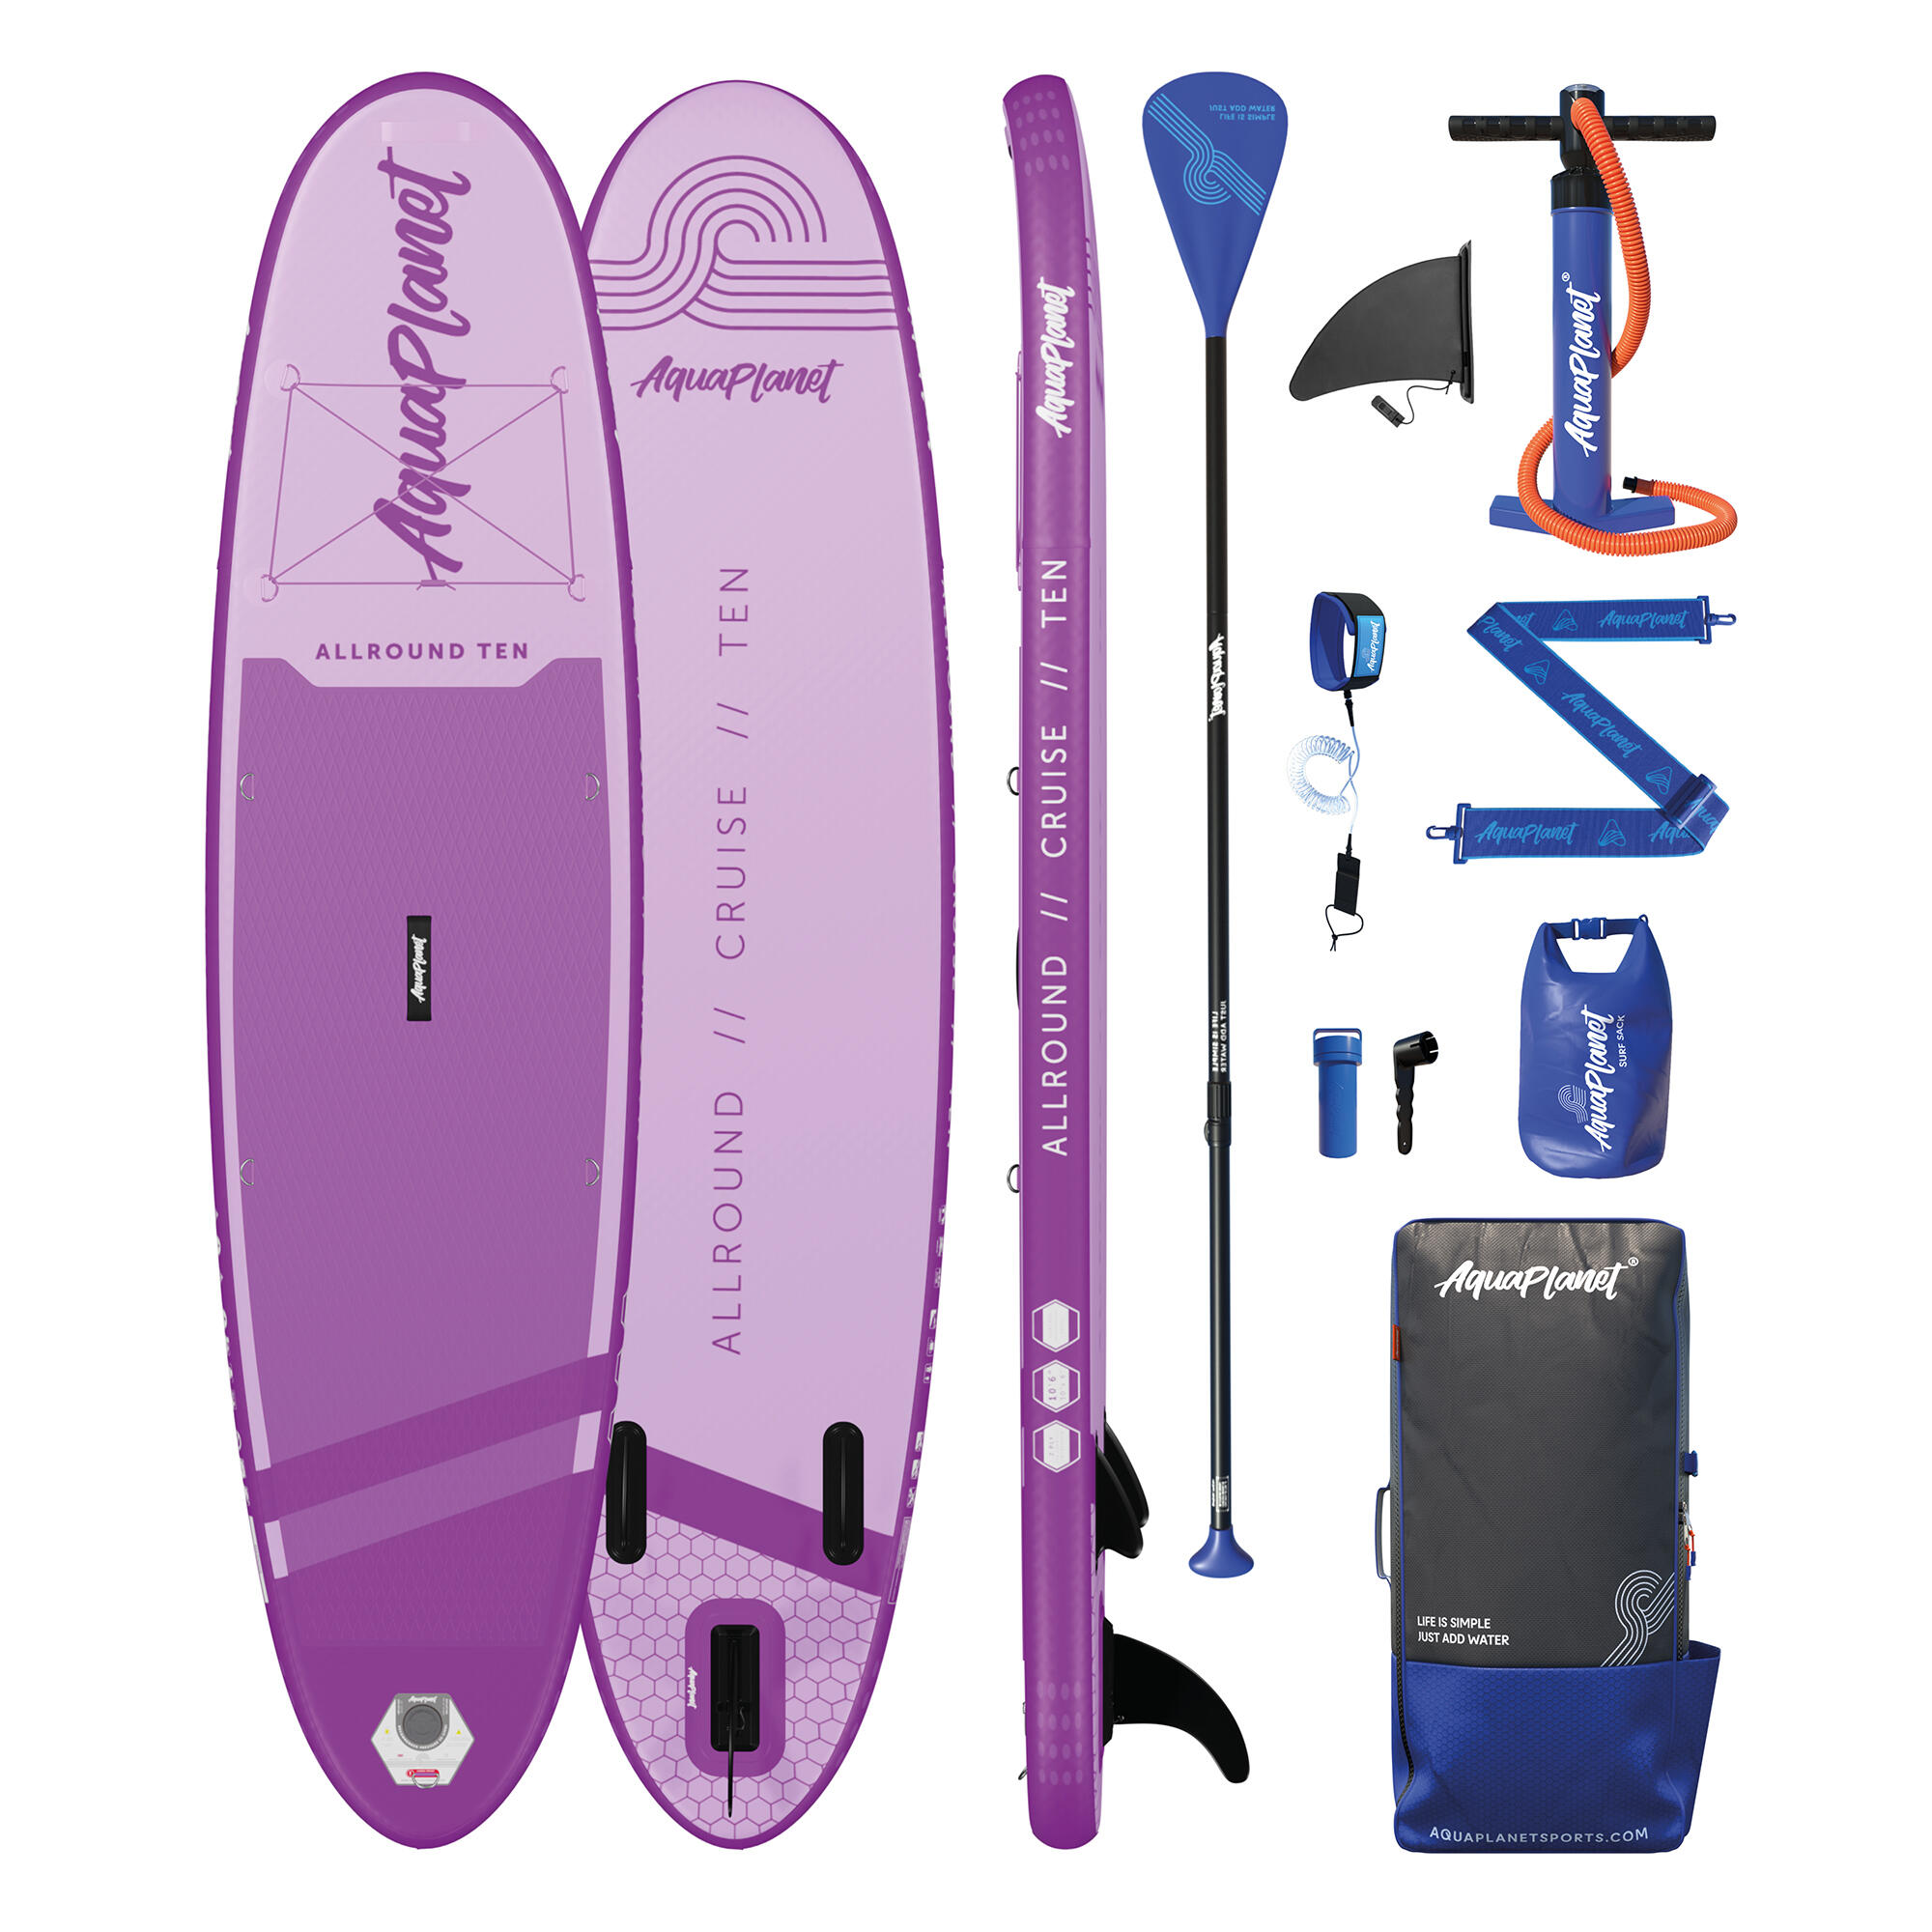 Aquaplanet ALLROUND TEN 10’ Inflatable Paddle Board Package - Purple 1/6